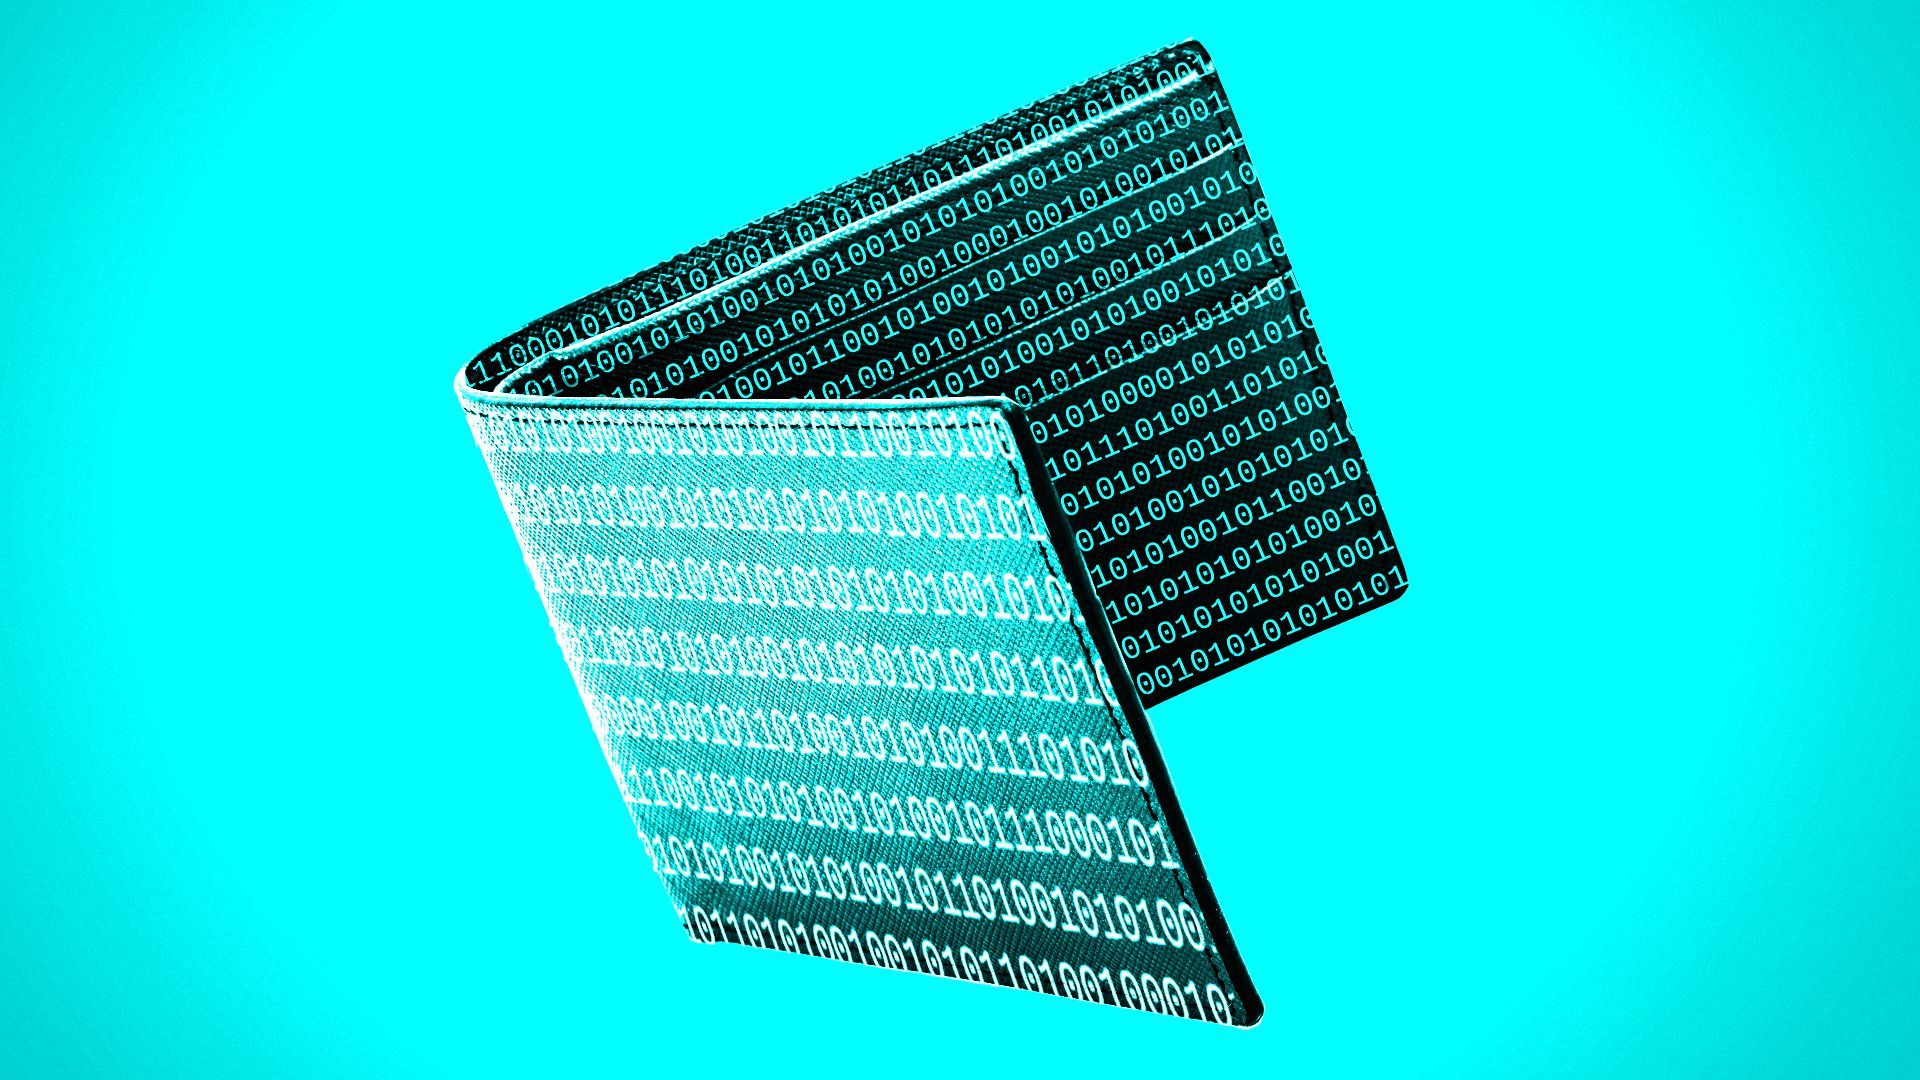 Illustration of a wallet shape filled with binary code